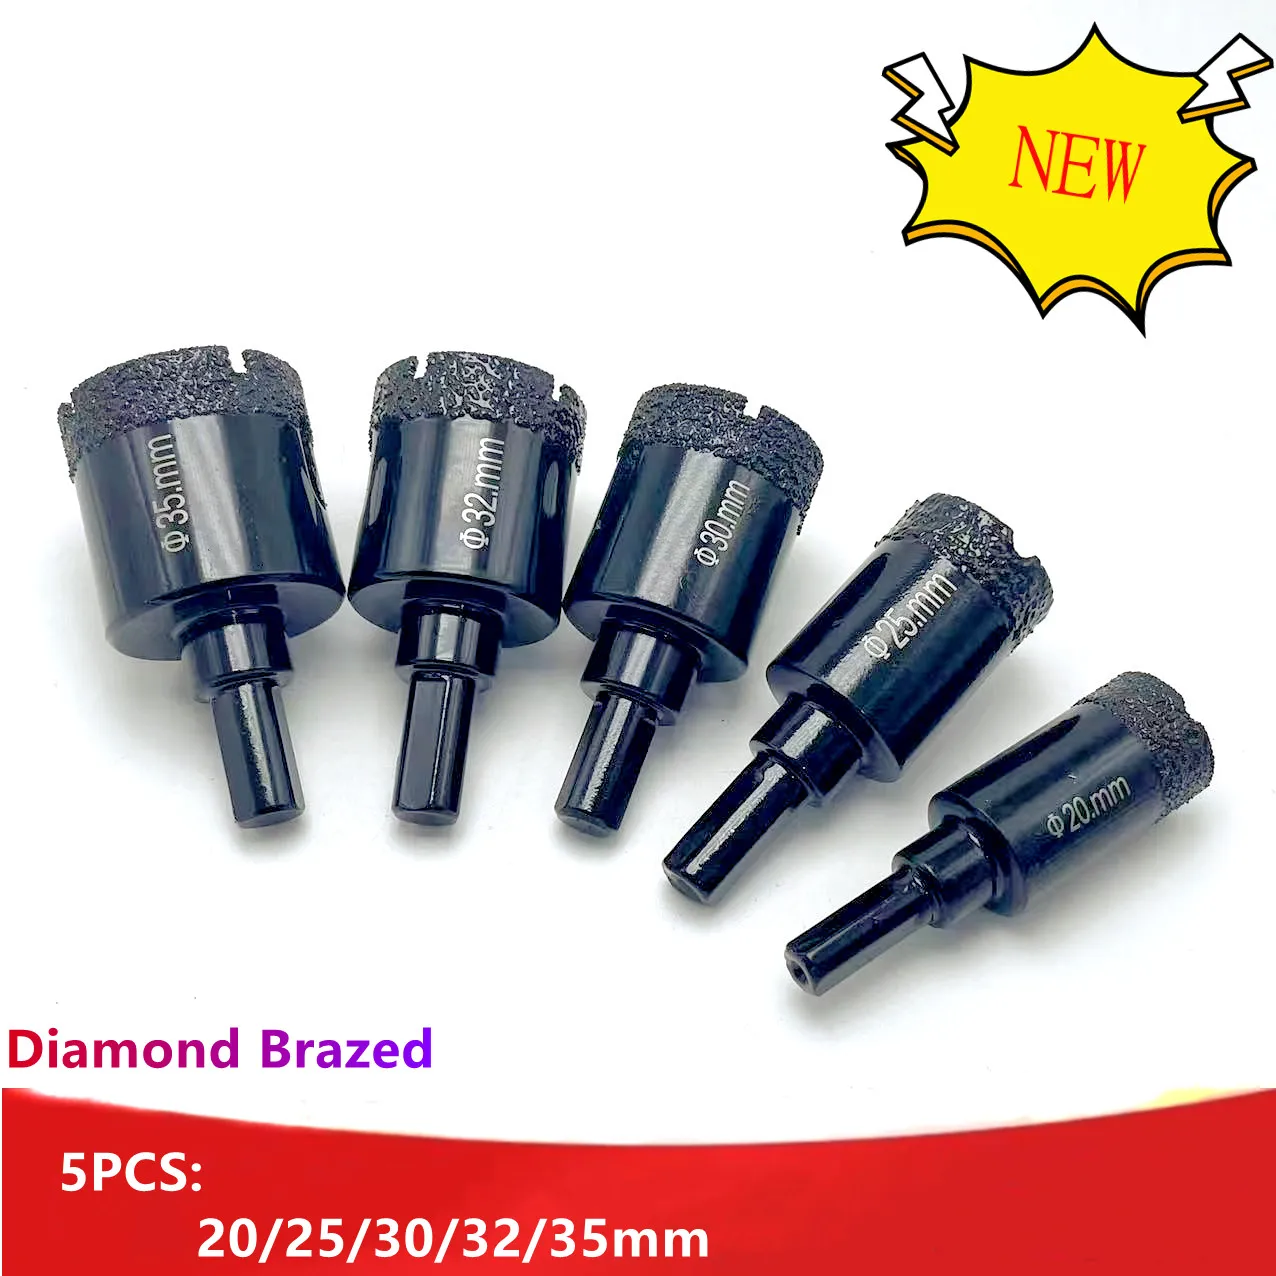 1set 20-35mm Diamond Brazed Core Dry Drill Bit For Porcelain Tiles Marble Glass Granite Hole Cup Saw Cutter Accessories Cutting